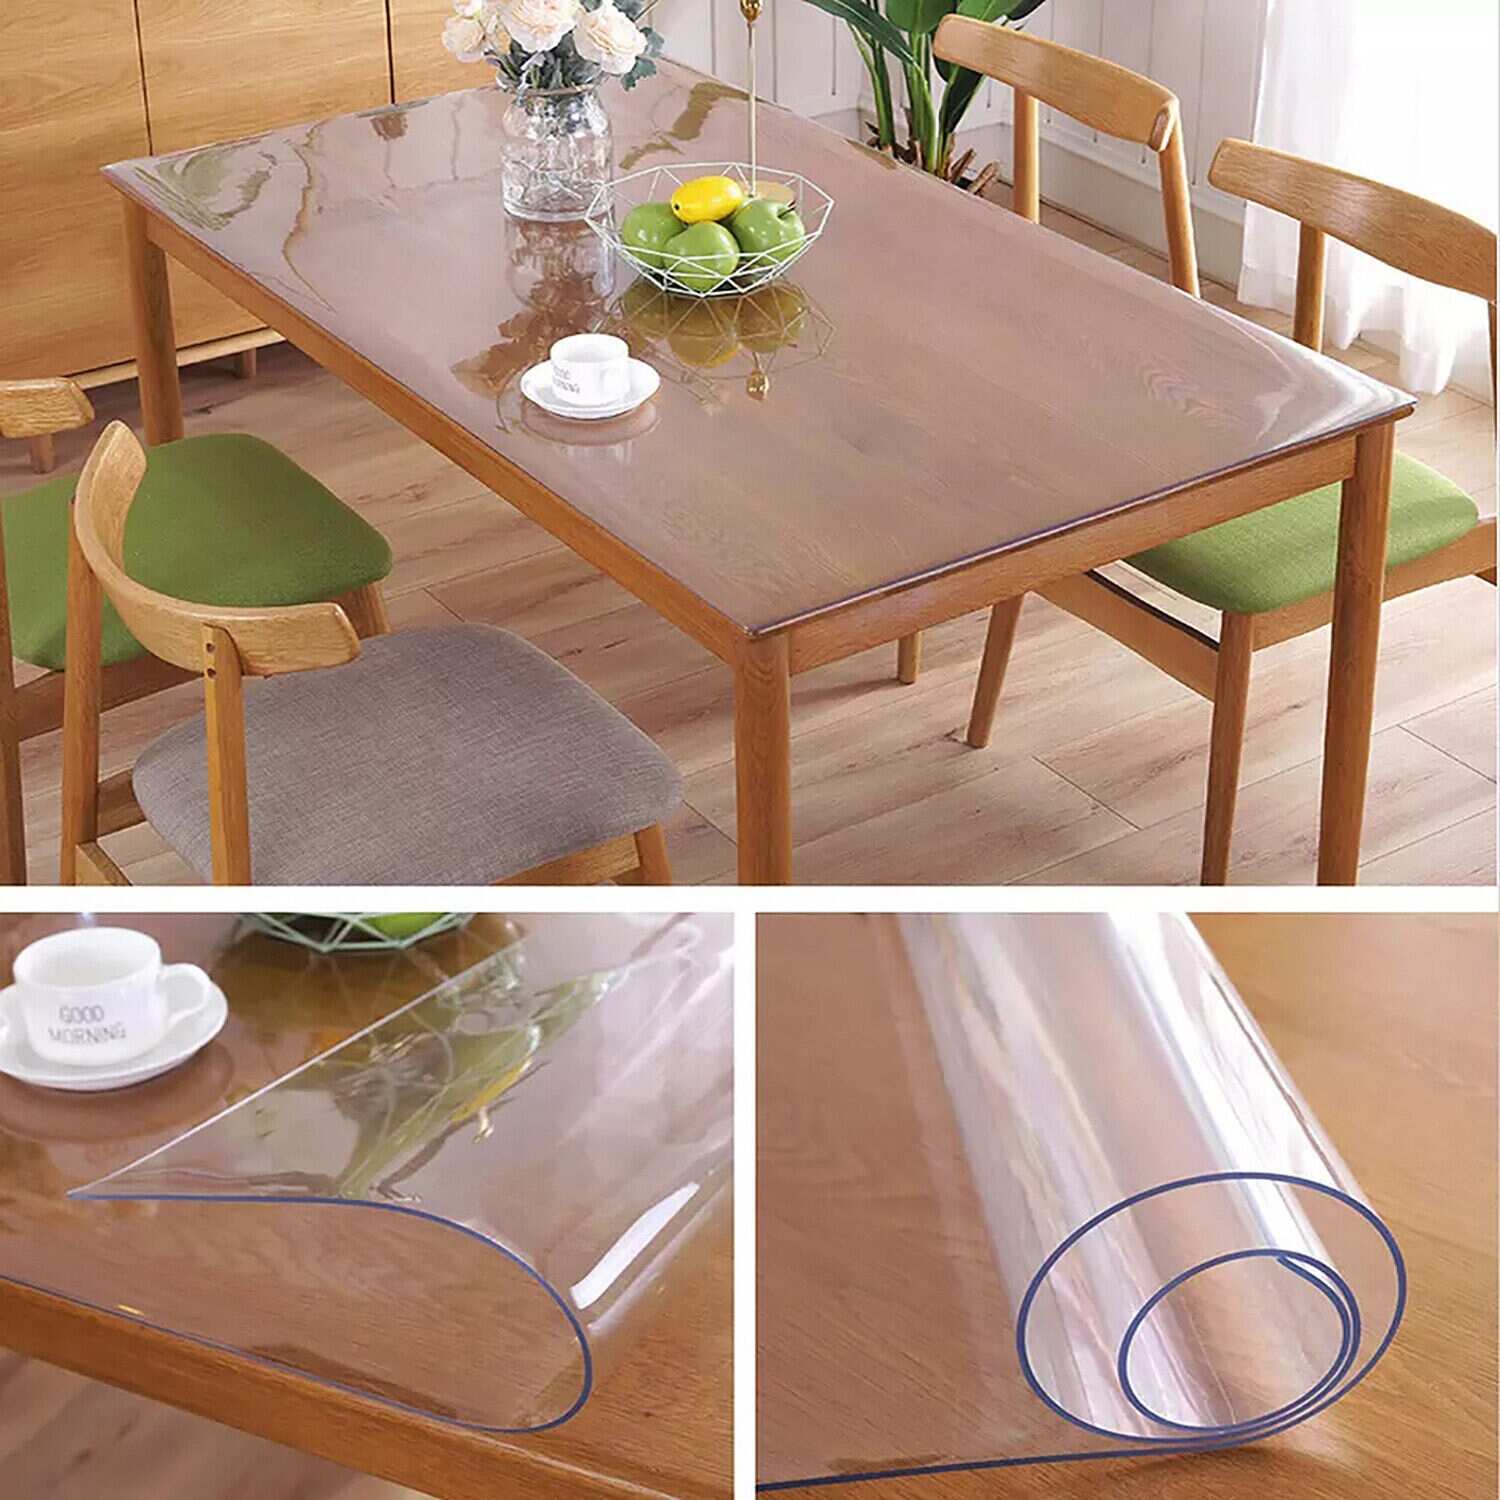 49 Gauge (0.49mm Thick) - 13 Yards Full Roll Premium Clear Plastic Vinyl Table Cover Protector